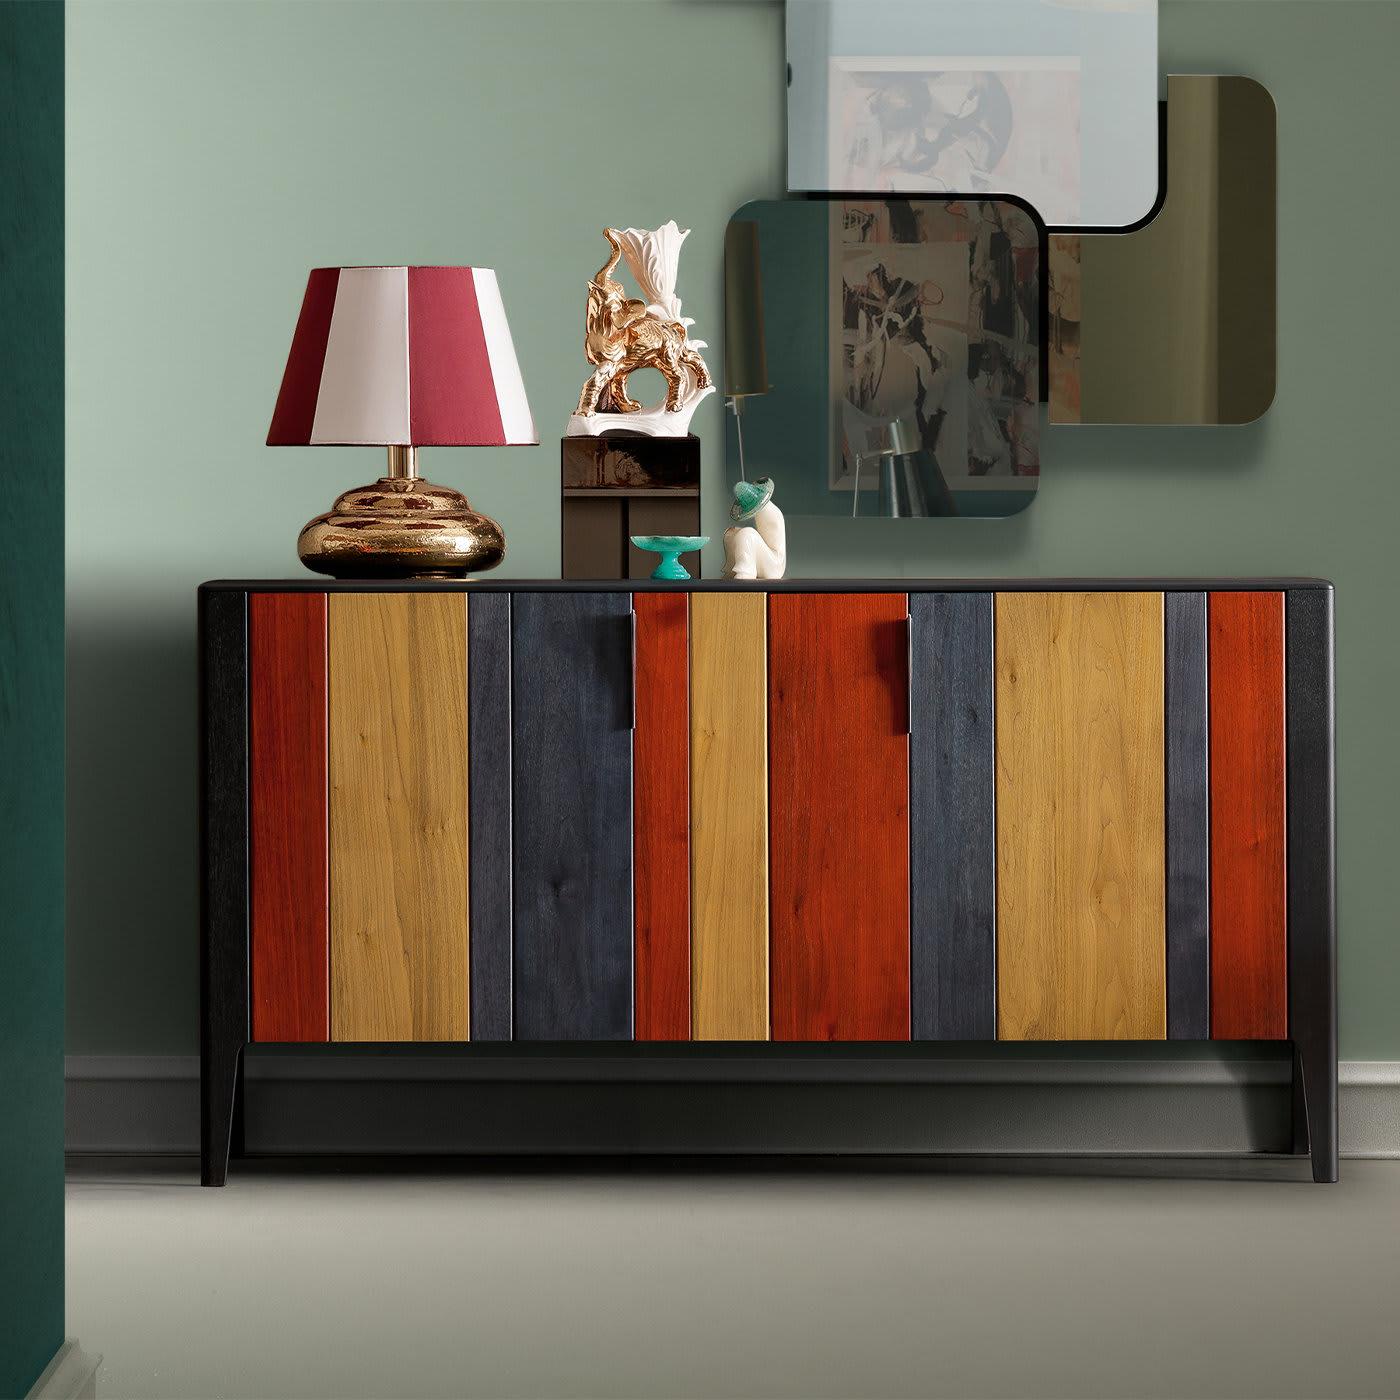 Brighten up an entryway, living room or dining area with the unabashedly colorful Domino Credenza, featuring two Canaletto walnut doors in rich yellow, red and anthracite finishes. The credenza comes complete with inner glass shelves, making it the